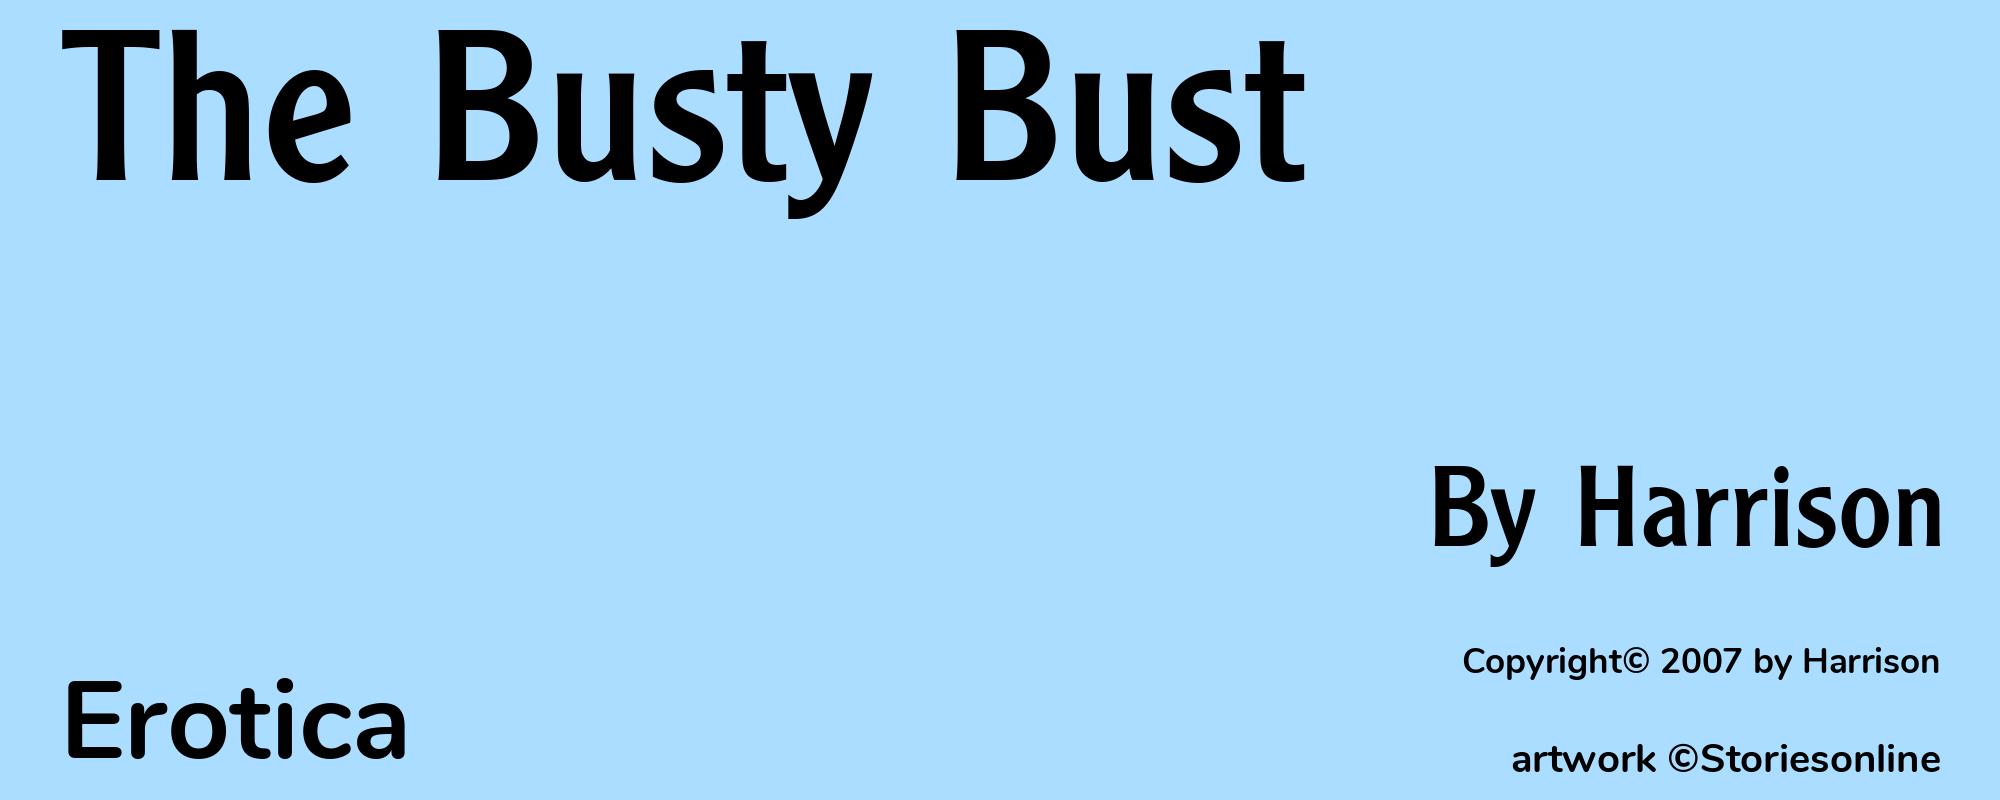 The Busty Bust - Cover